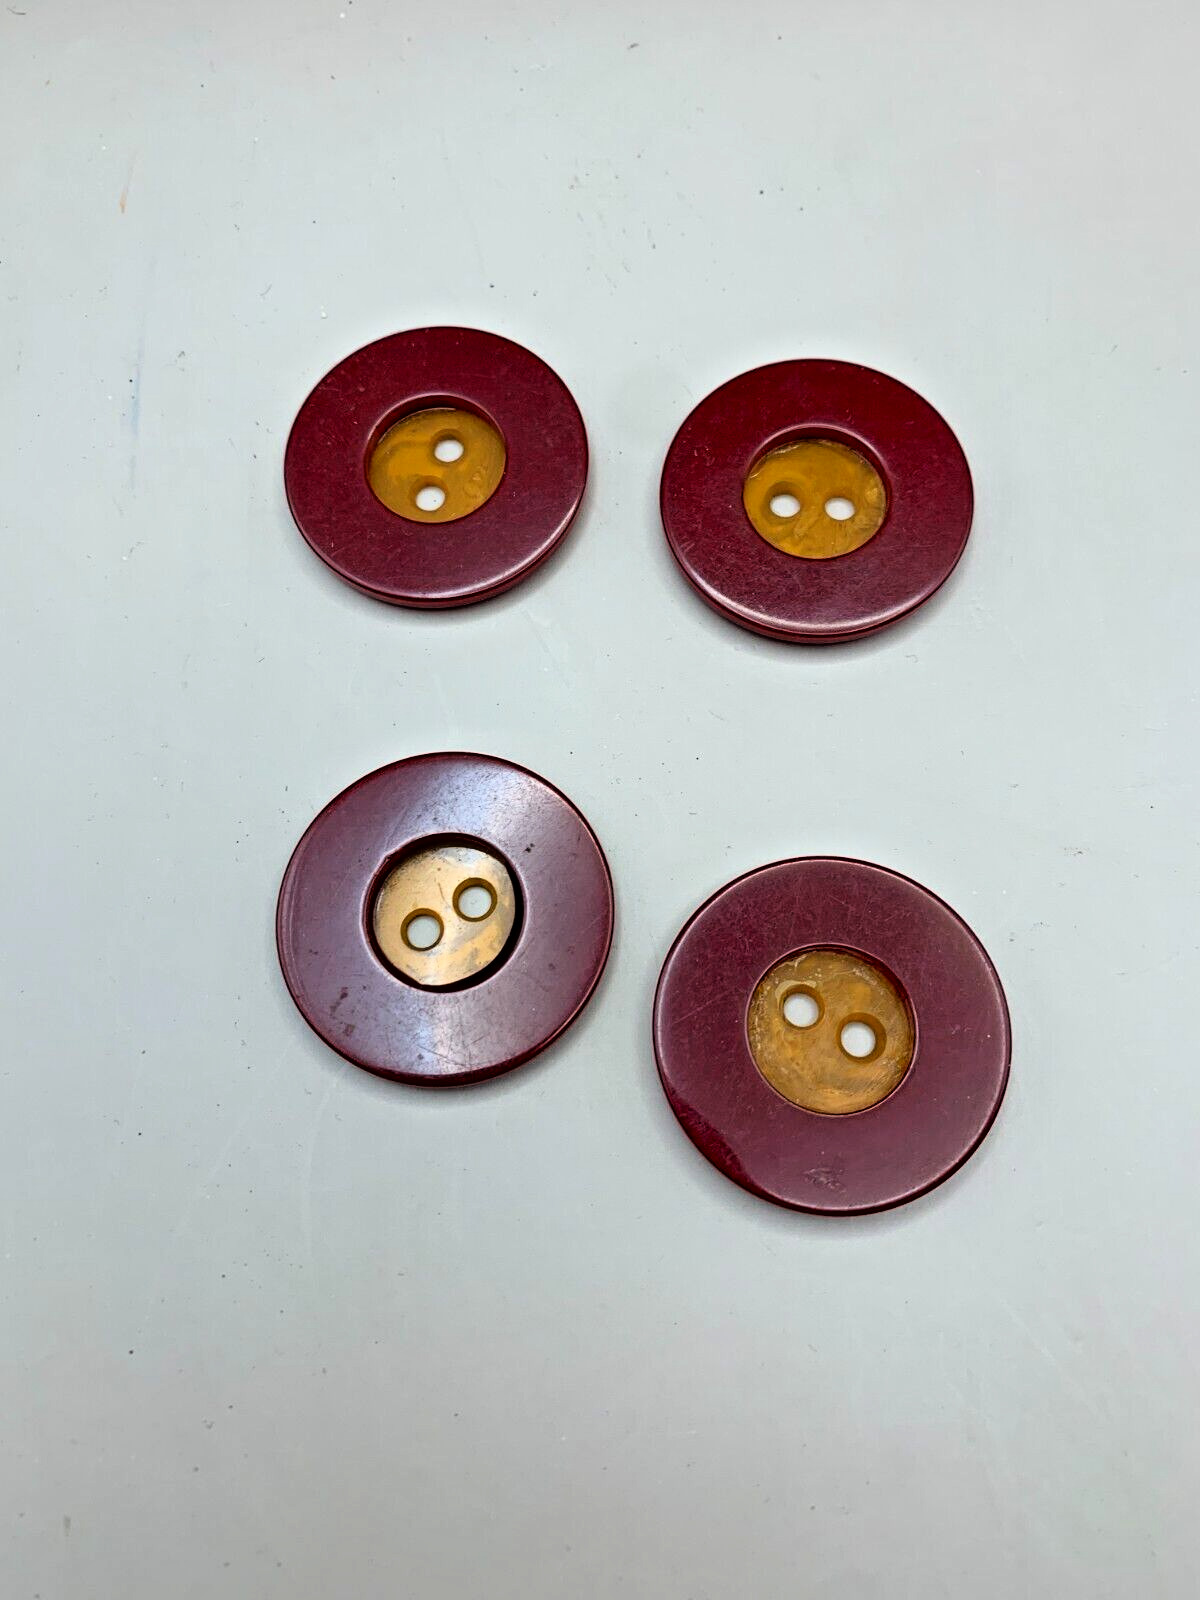 Bakelite Two Tone Mottled Orange and Red Large Button Lot of 4 Vintage